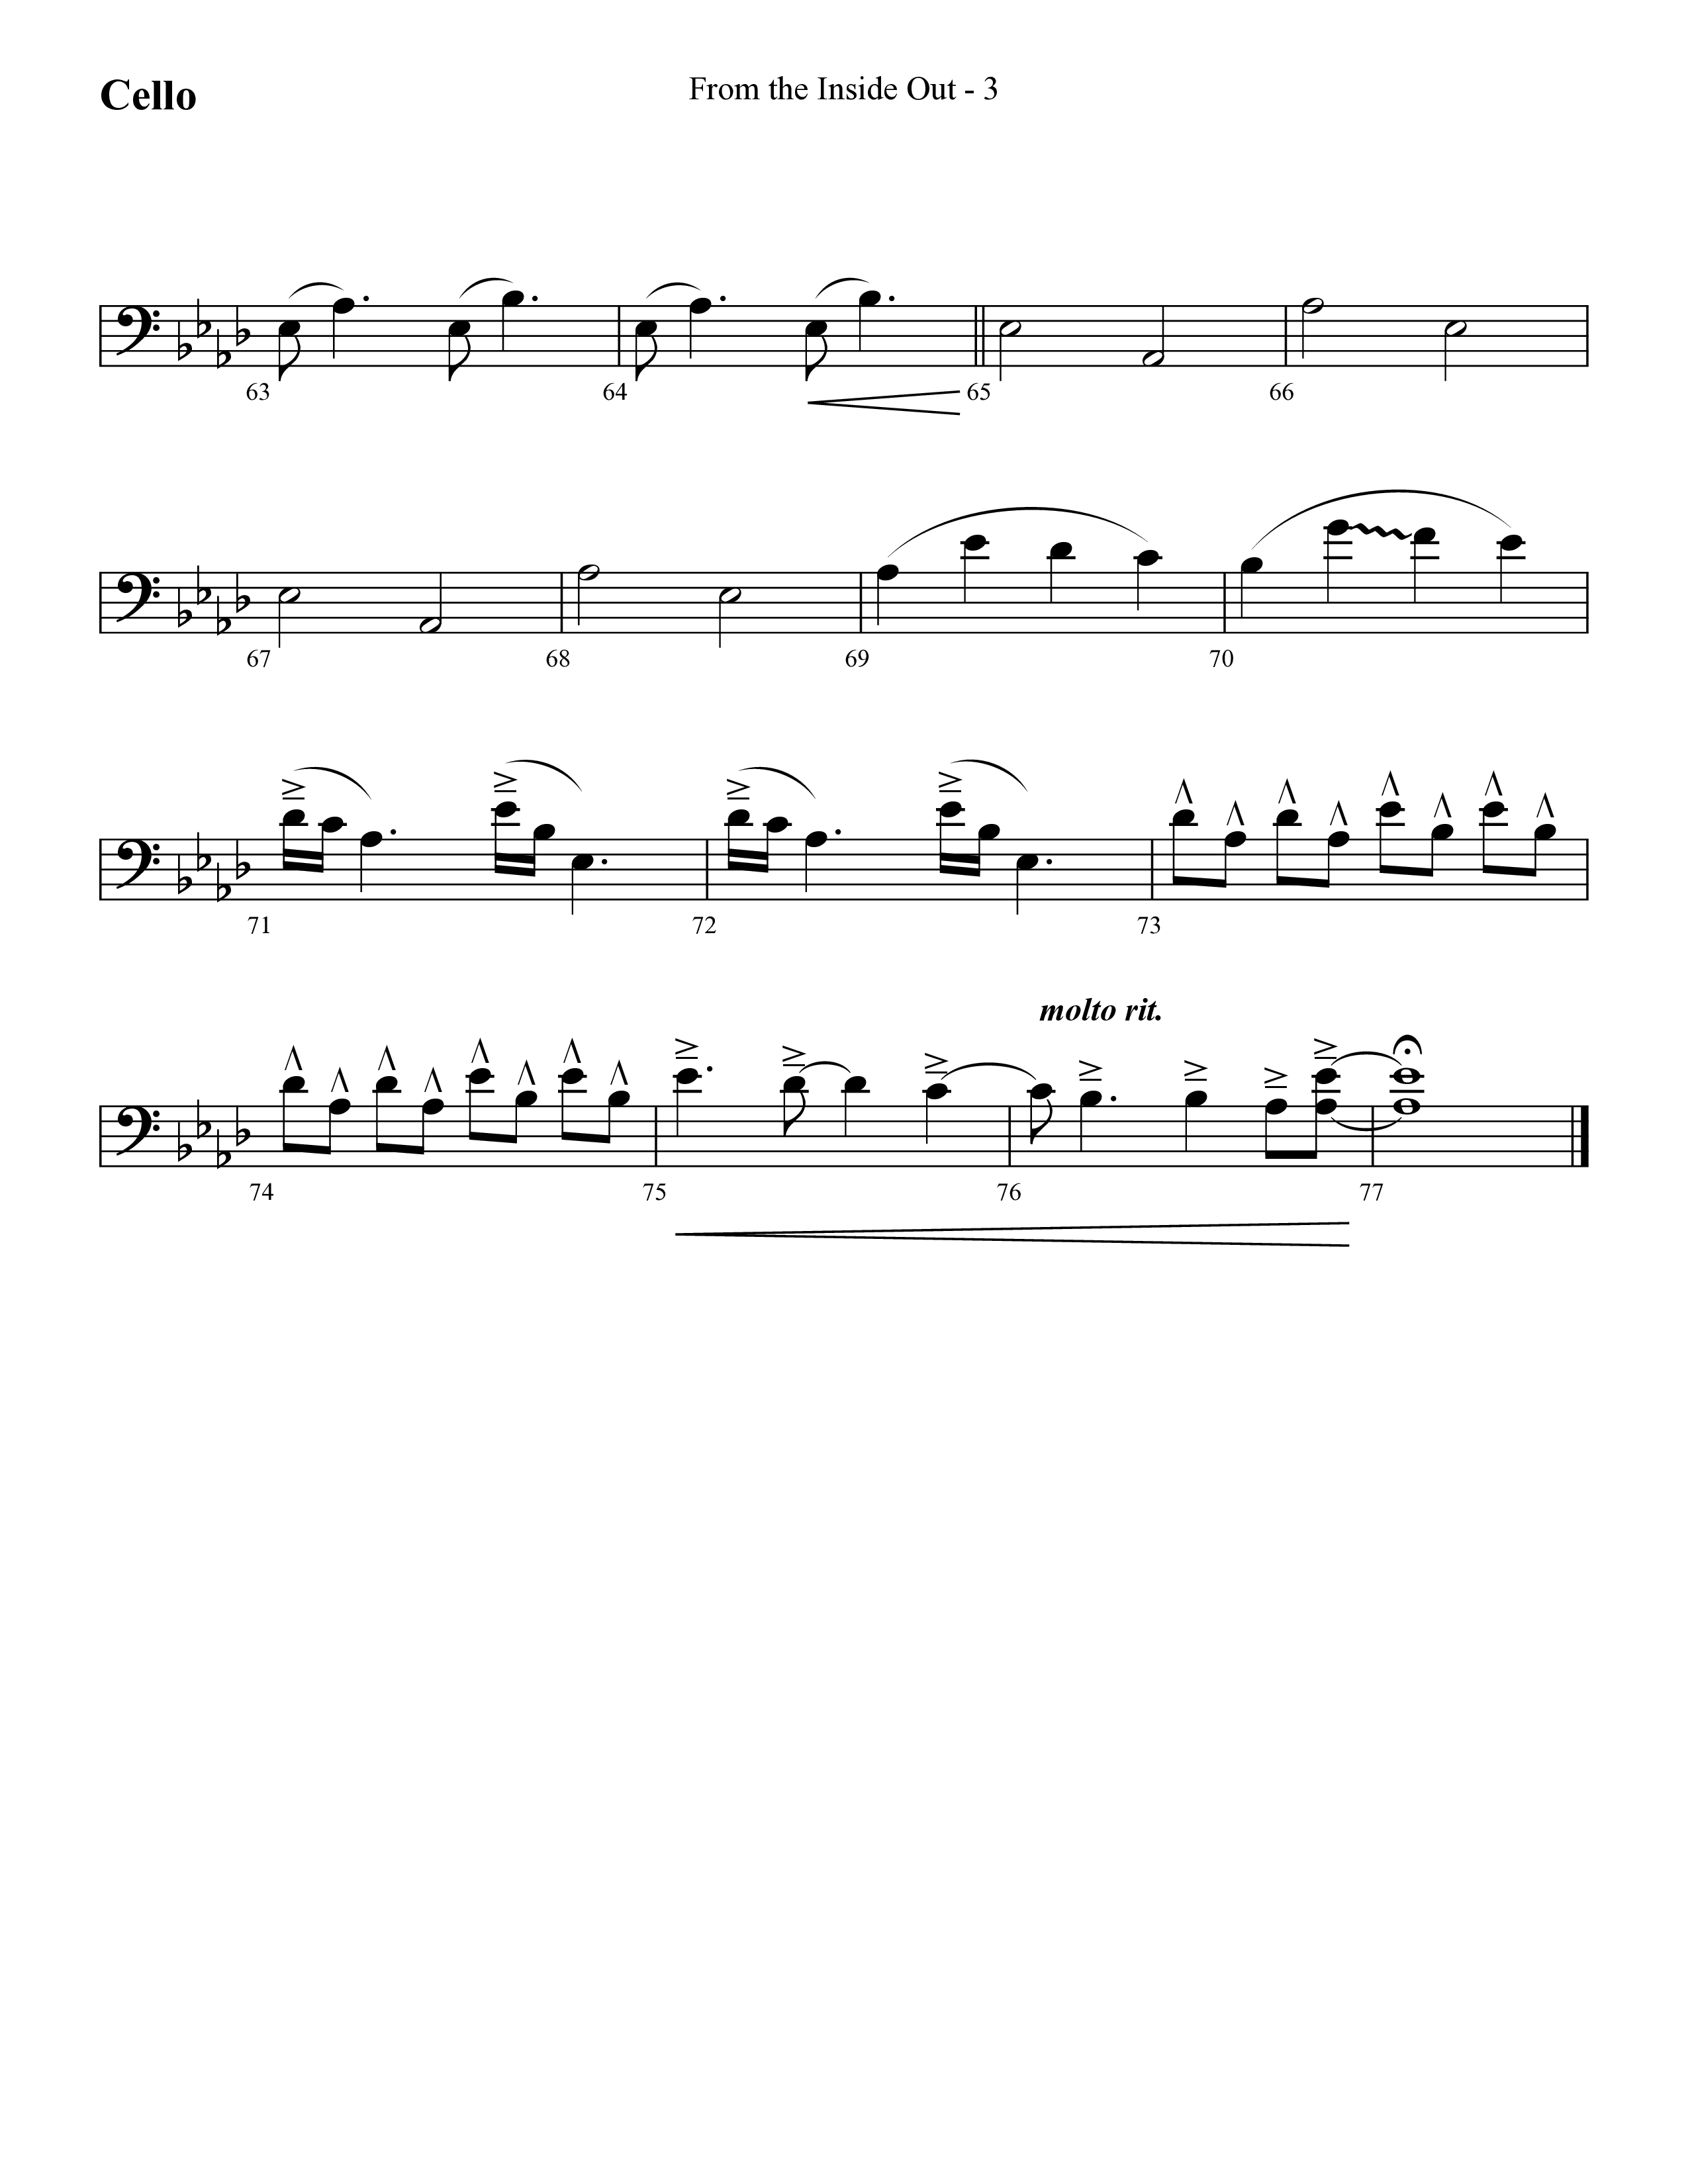 From The Inside Out (Choral Anthem SATB) Cello (Lifeway Choral / Arr. Cliff Duren)